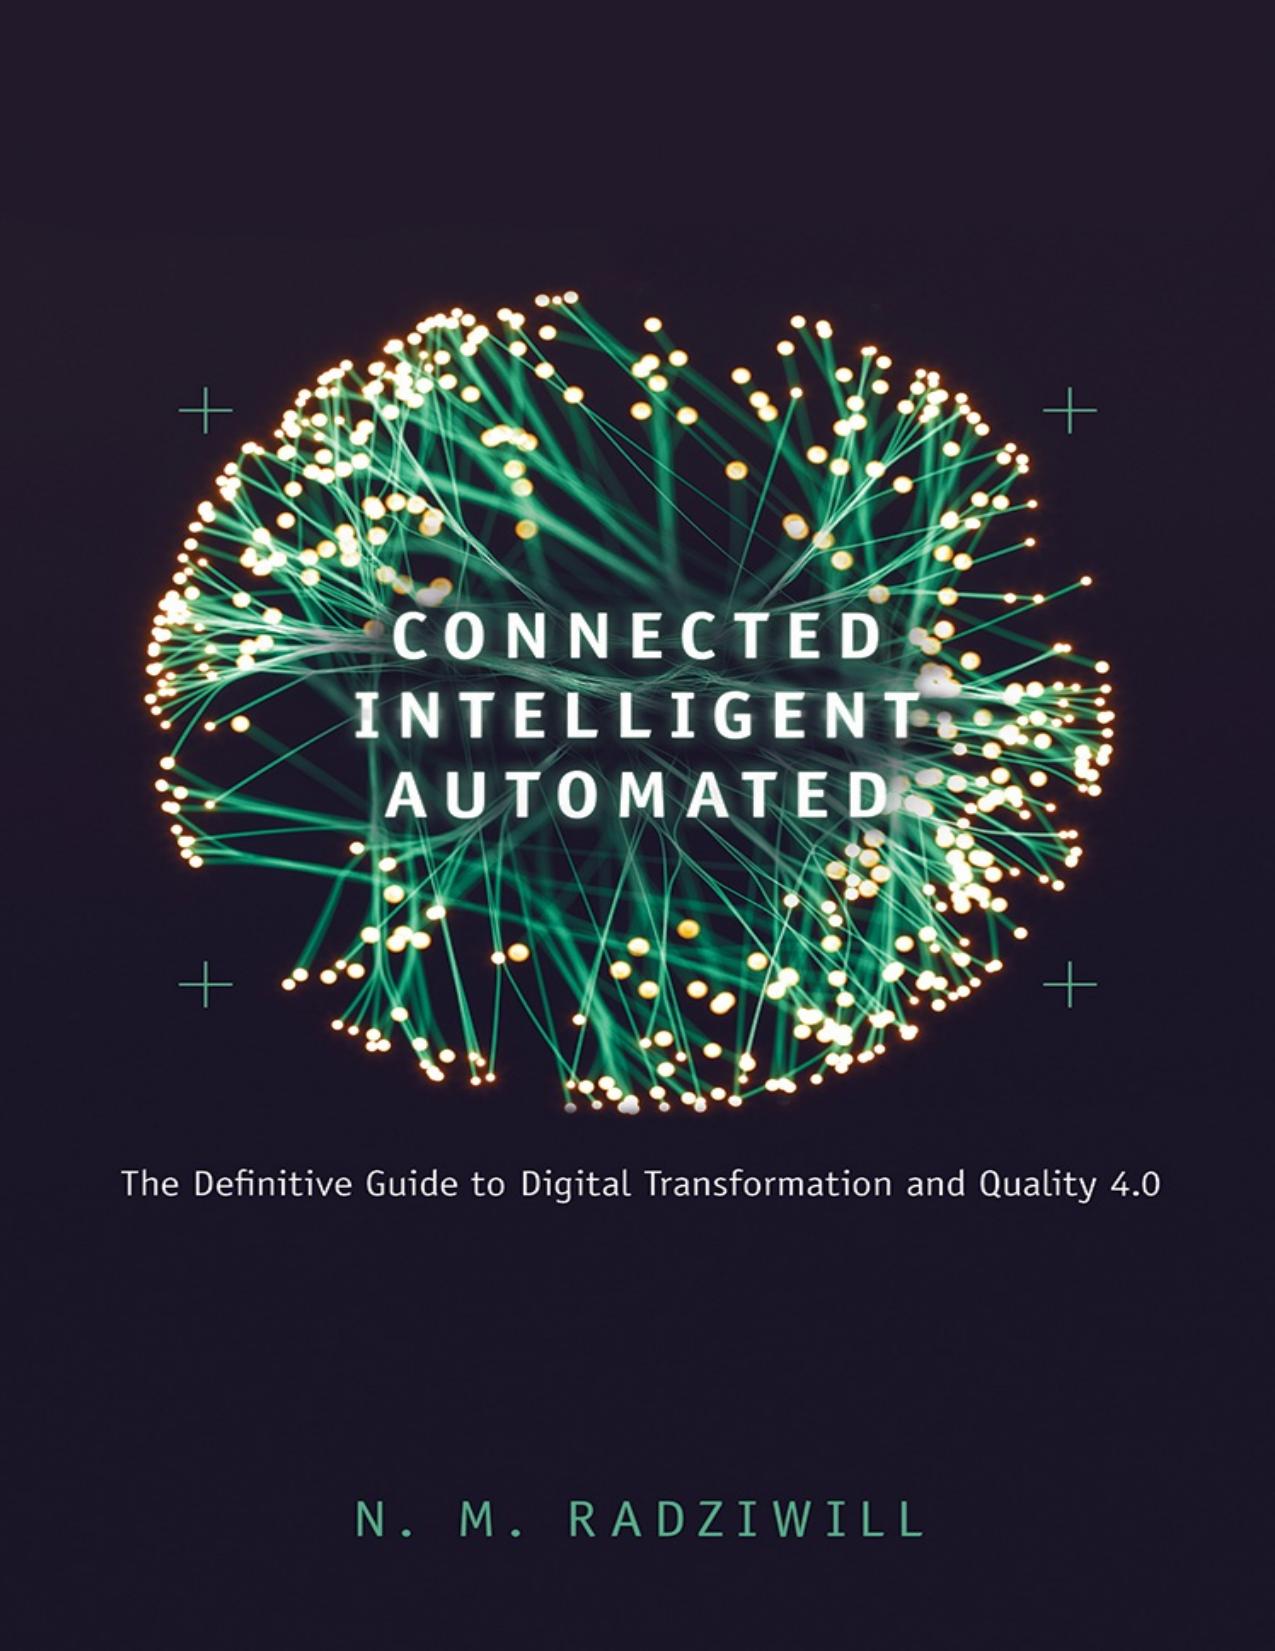 Connected, Intelligent, Automated: The Definitive Guide to Digital Transformation and Quality 4.0 by Radziwill N. M